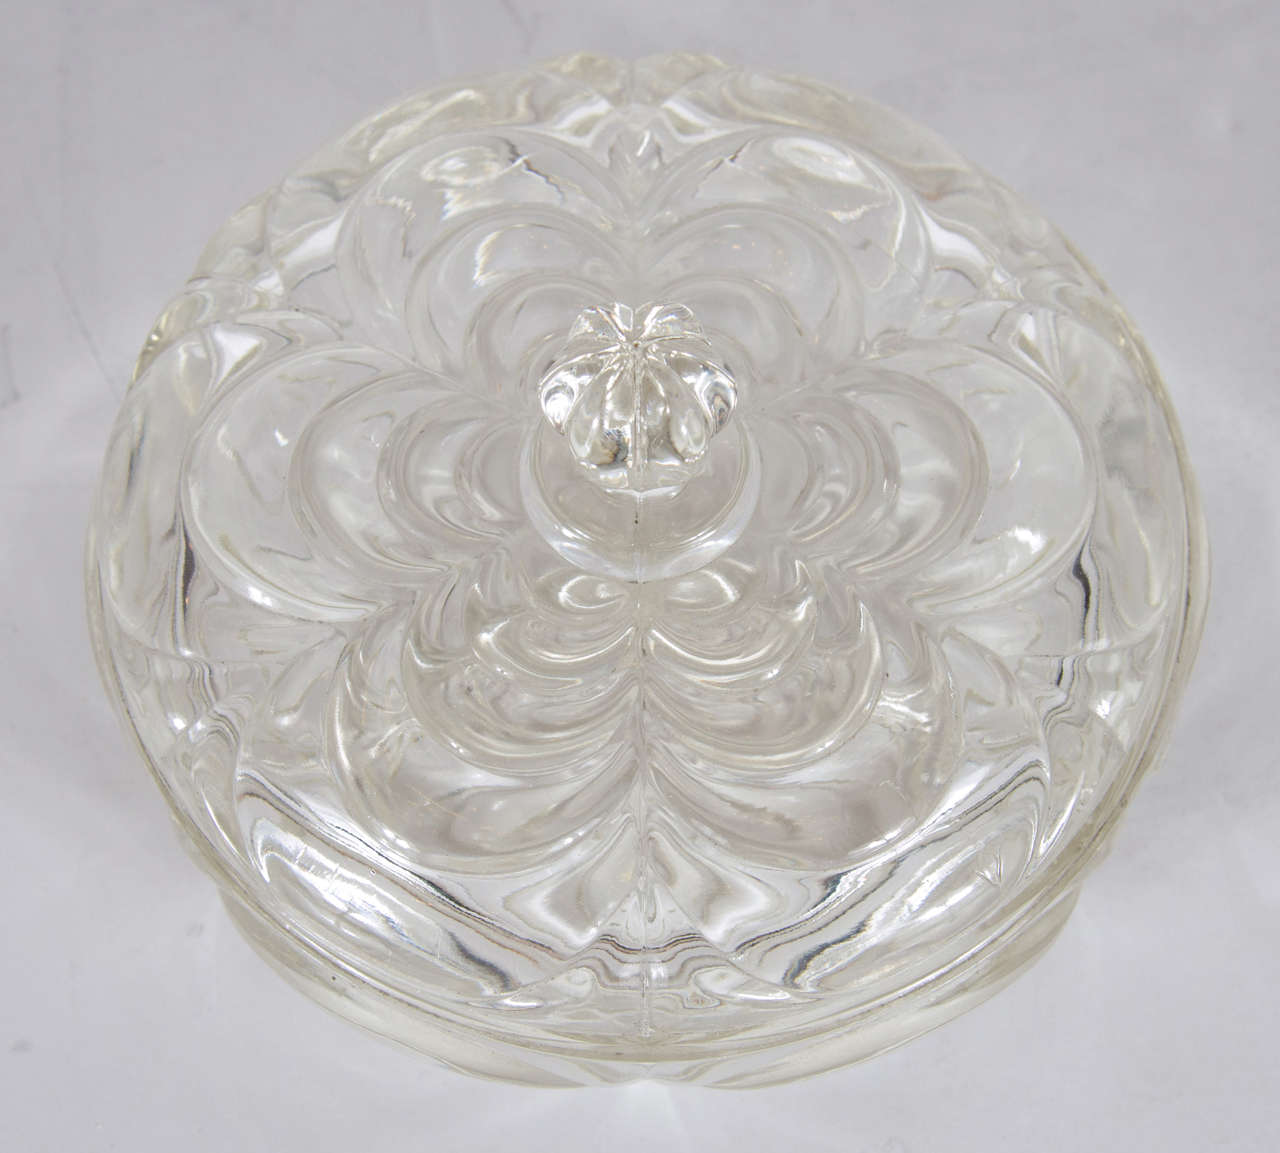 Art Deco glass dish with three inside divided compartments and a matching glass lid that features a fluted raised handle as a centerpiece that showcases a multilayered, scalloped floral design that is mimicked on the dish bottom.  It would be a